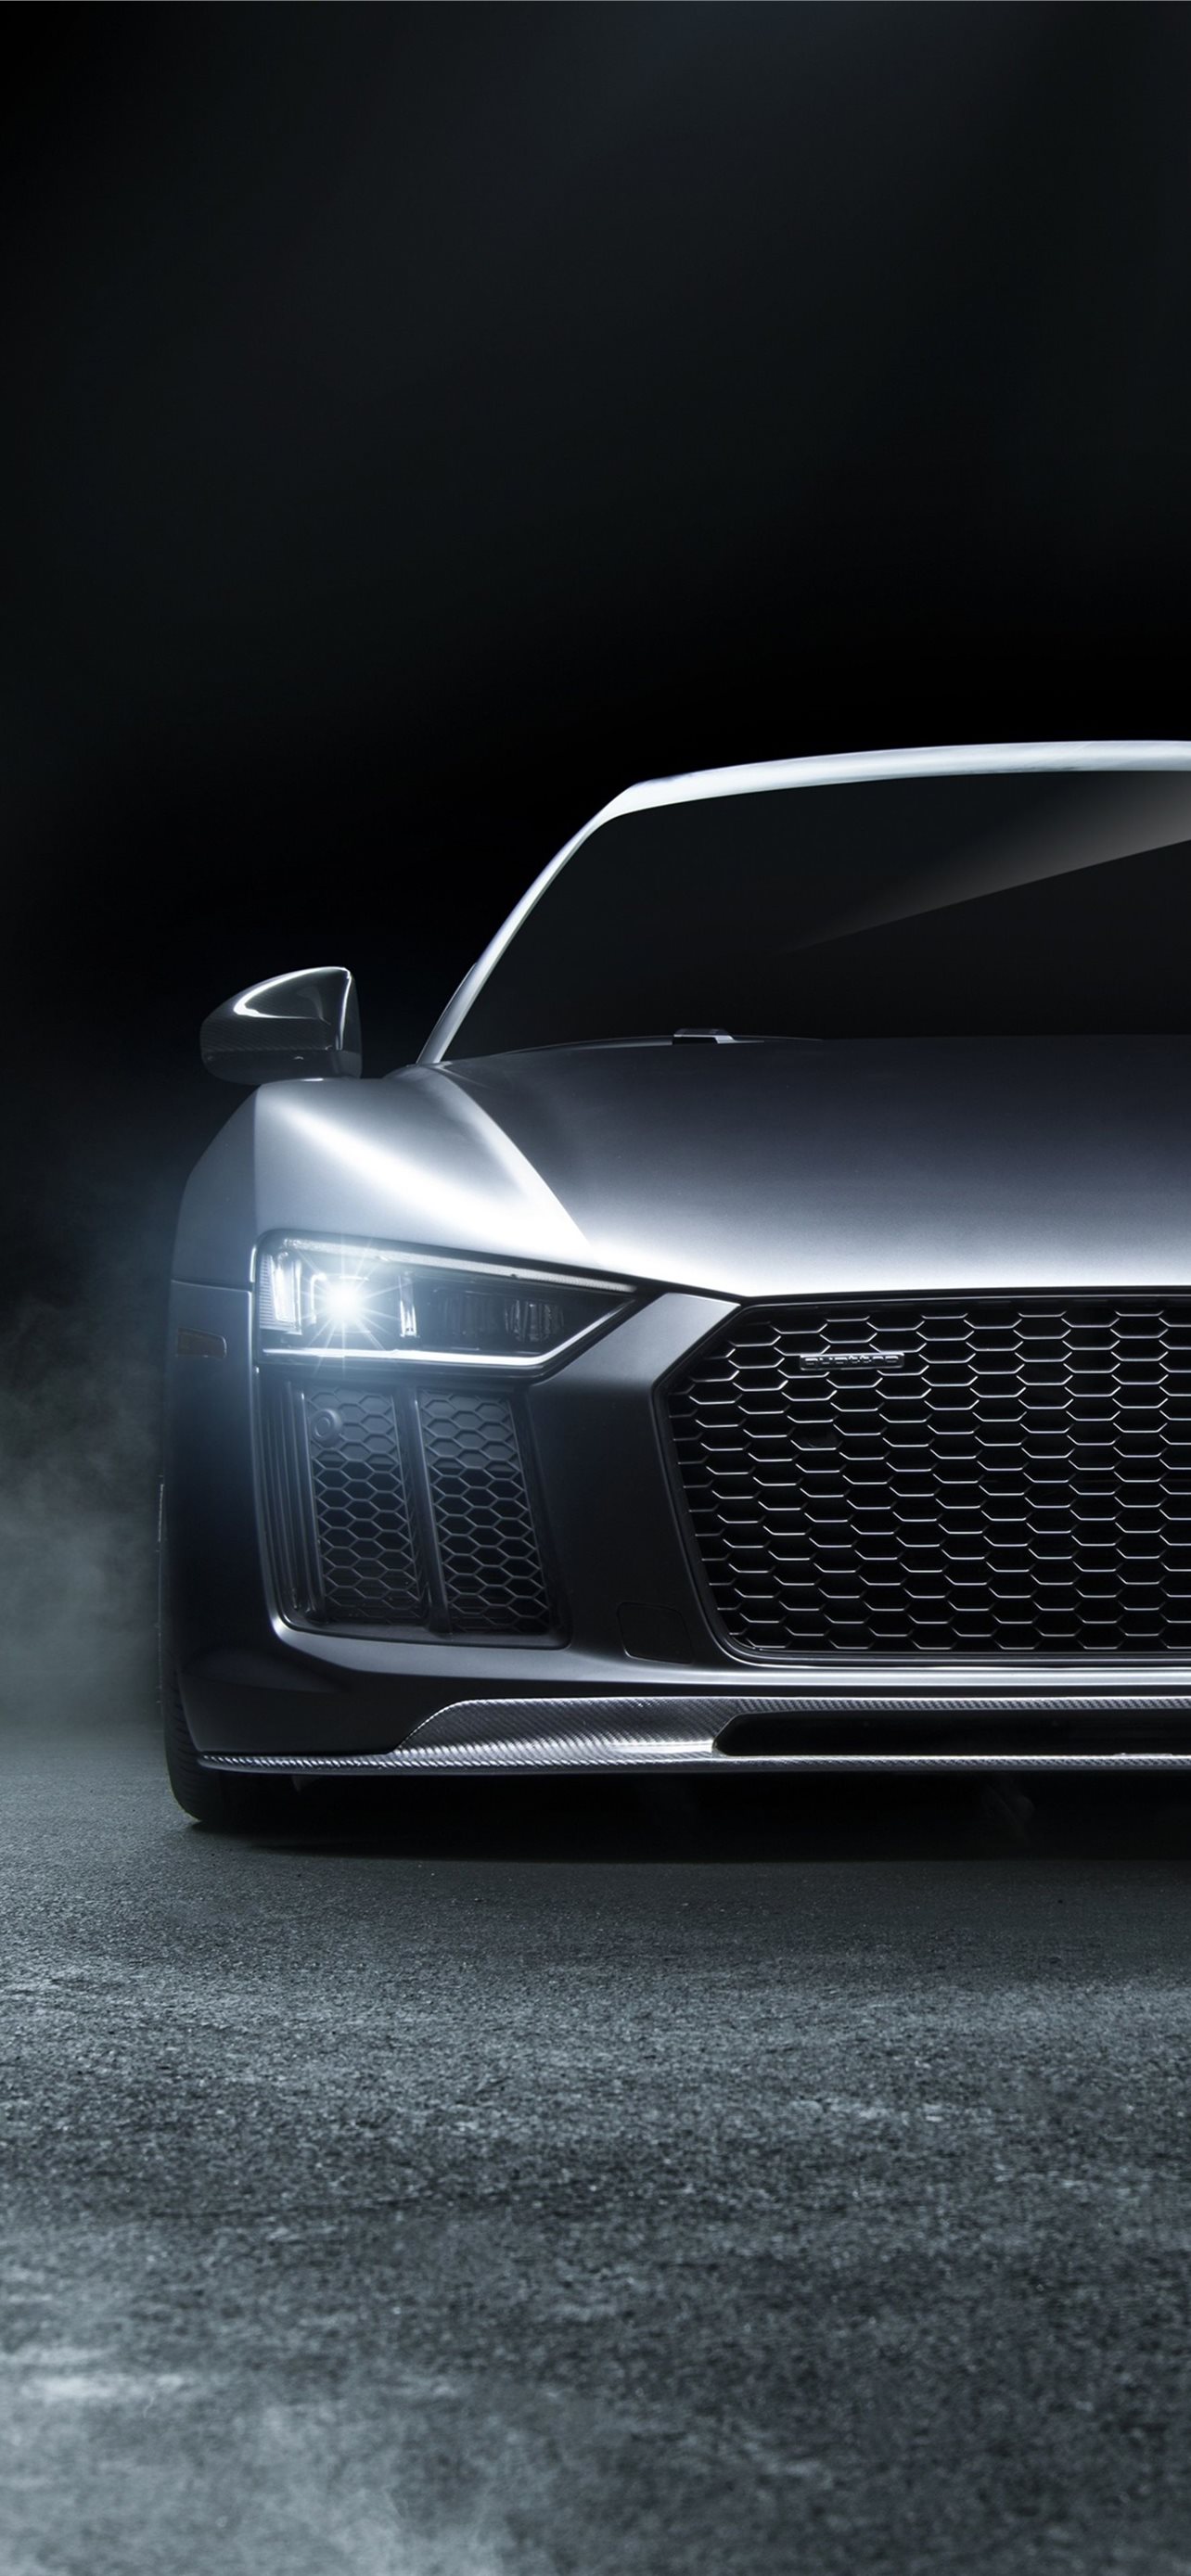 Audi Wallpapers, HD Audi Backgrounds, Free Images Download